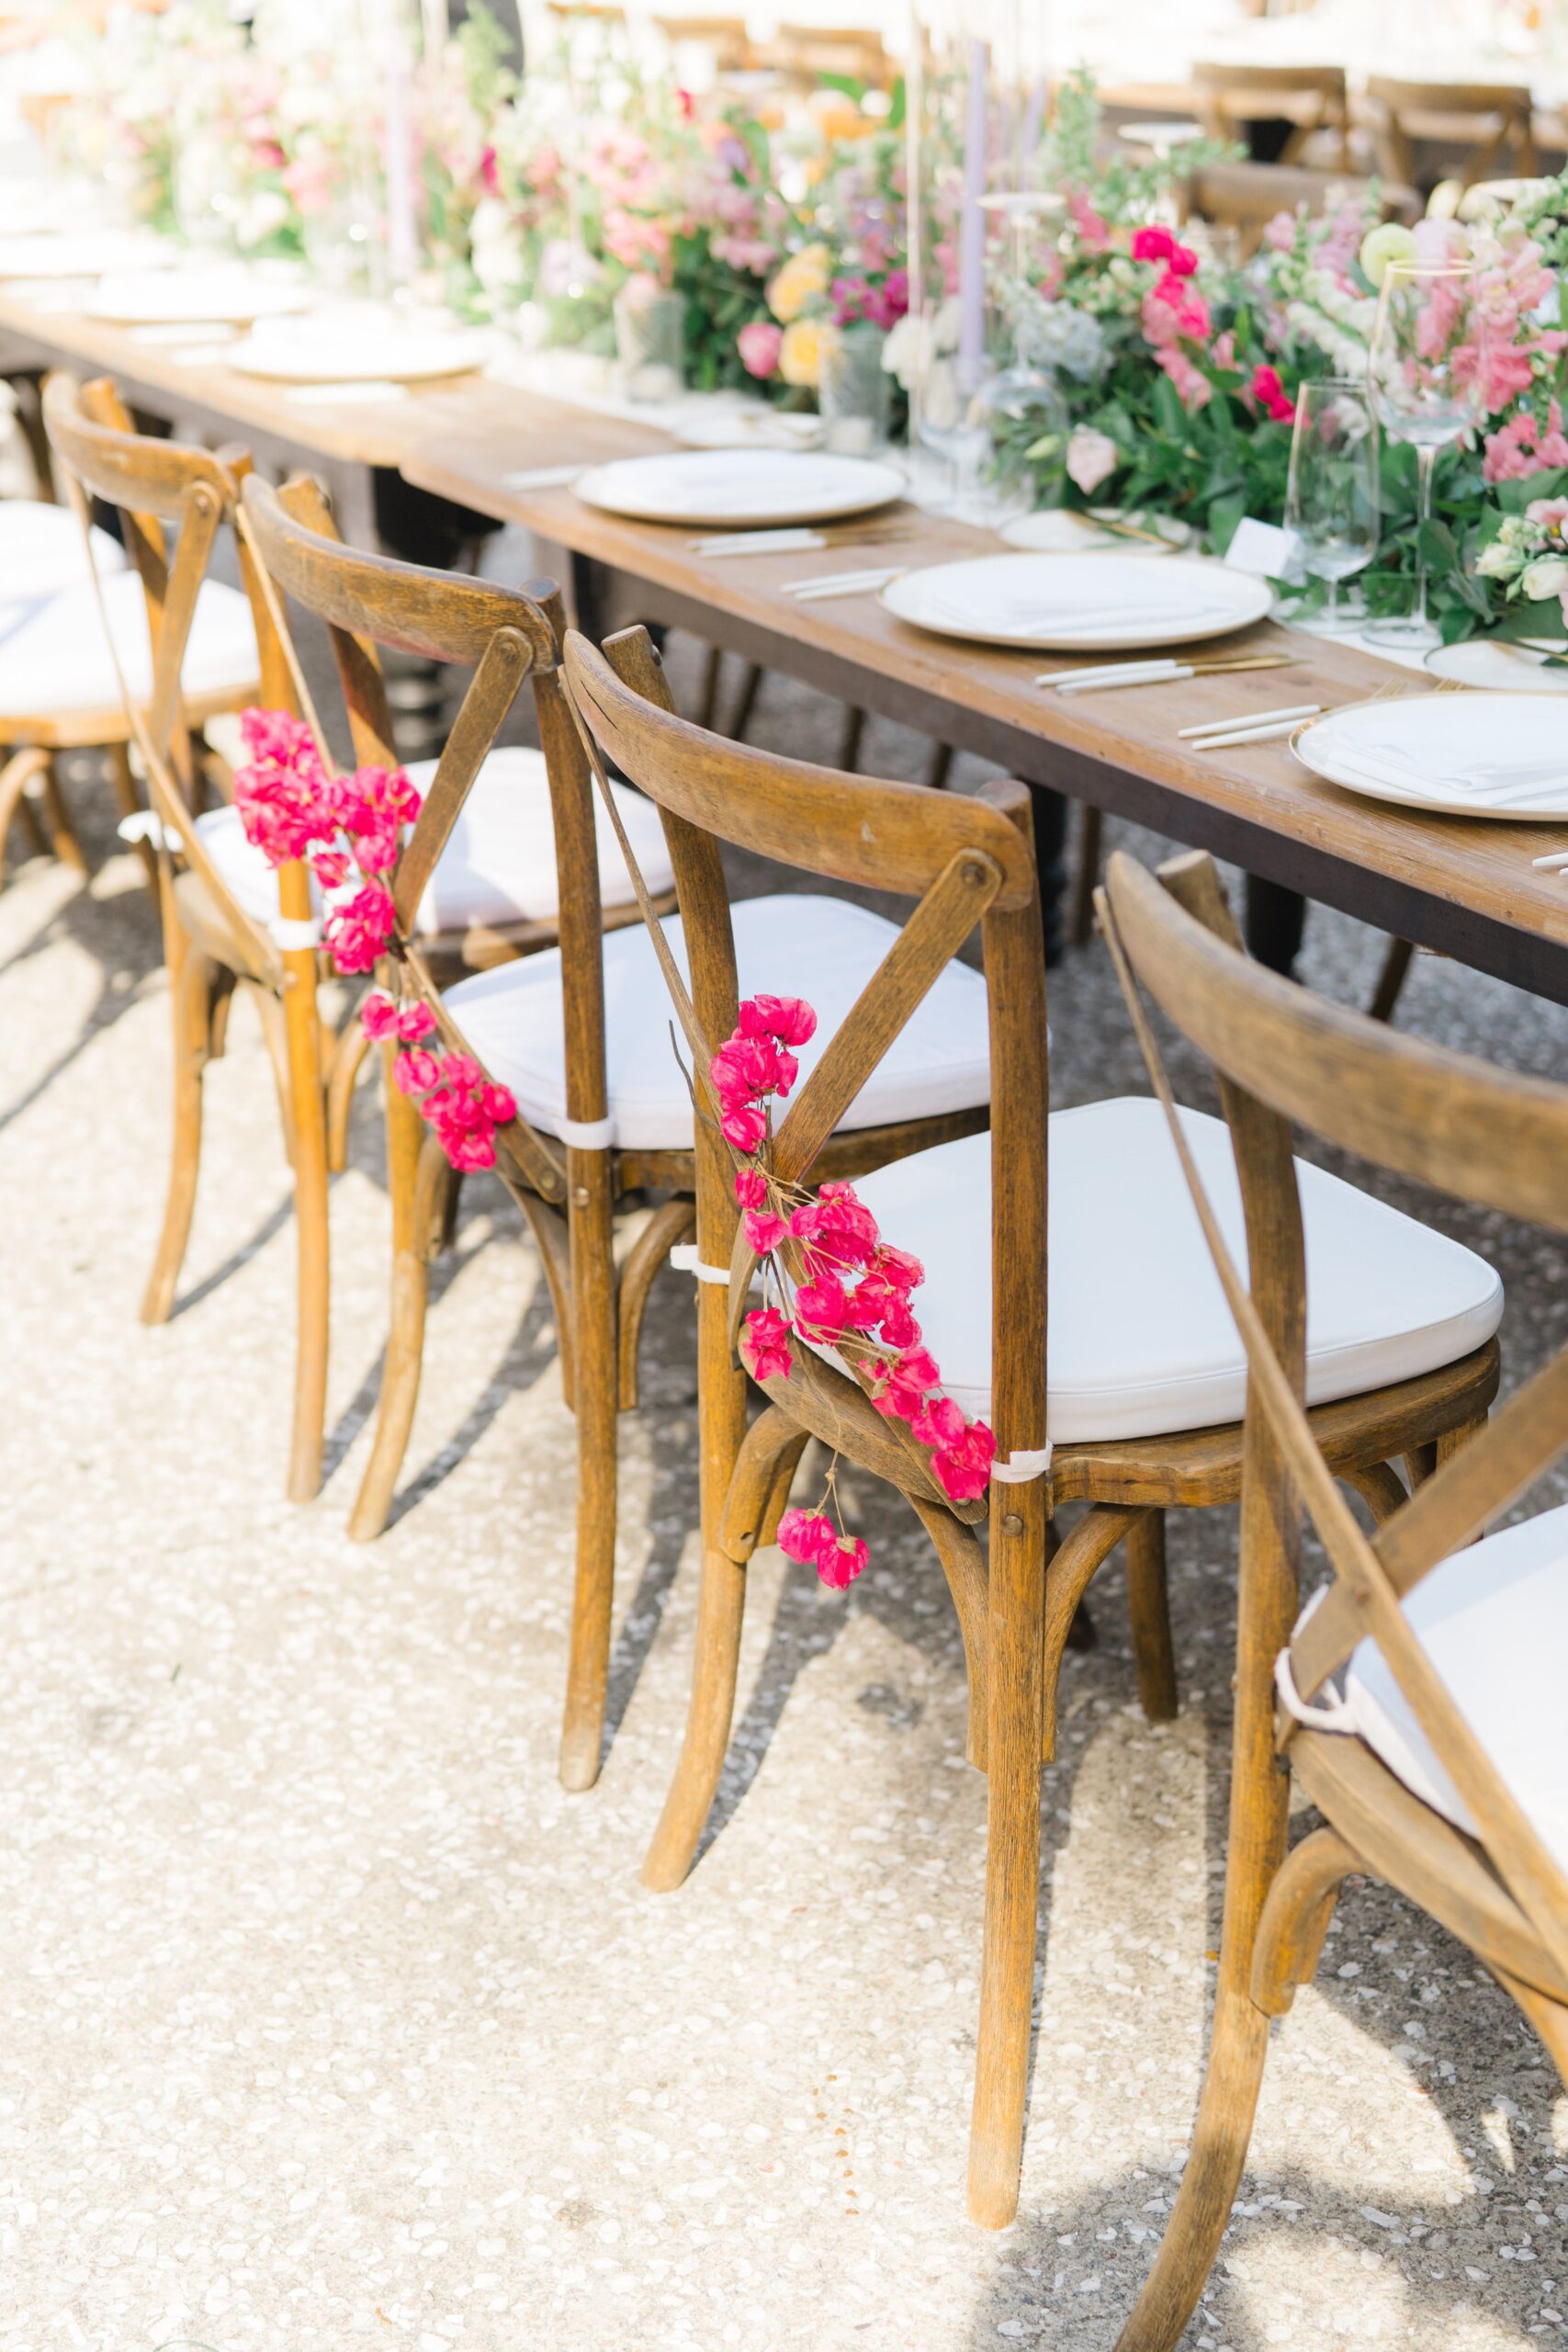 pink flowers accent bride and groom chairs for head table at outdoor al fresco wedding reception dinner.